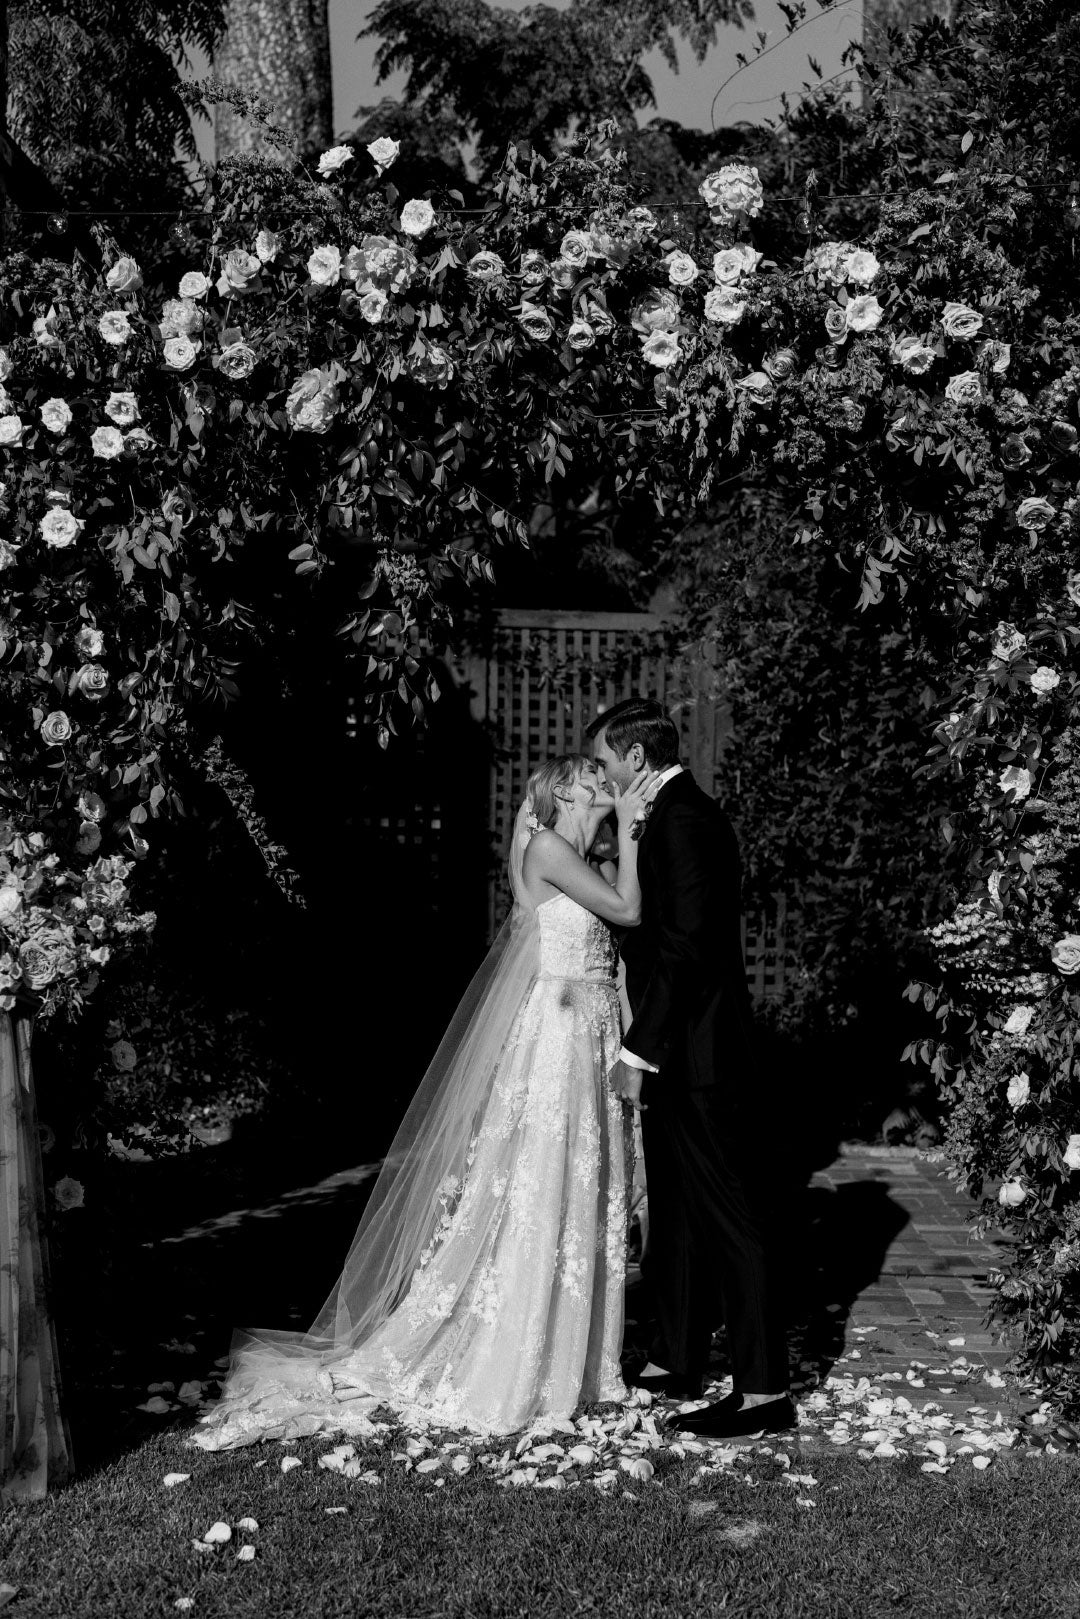 Bride and Groom Kissing after wedding vows